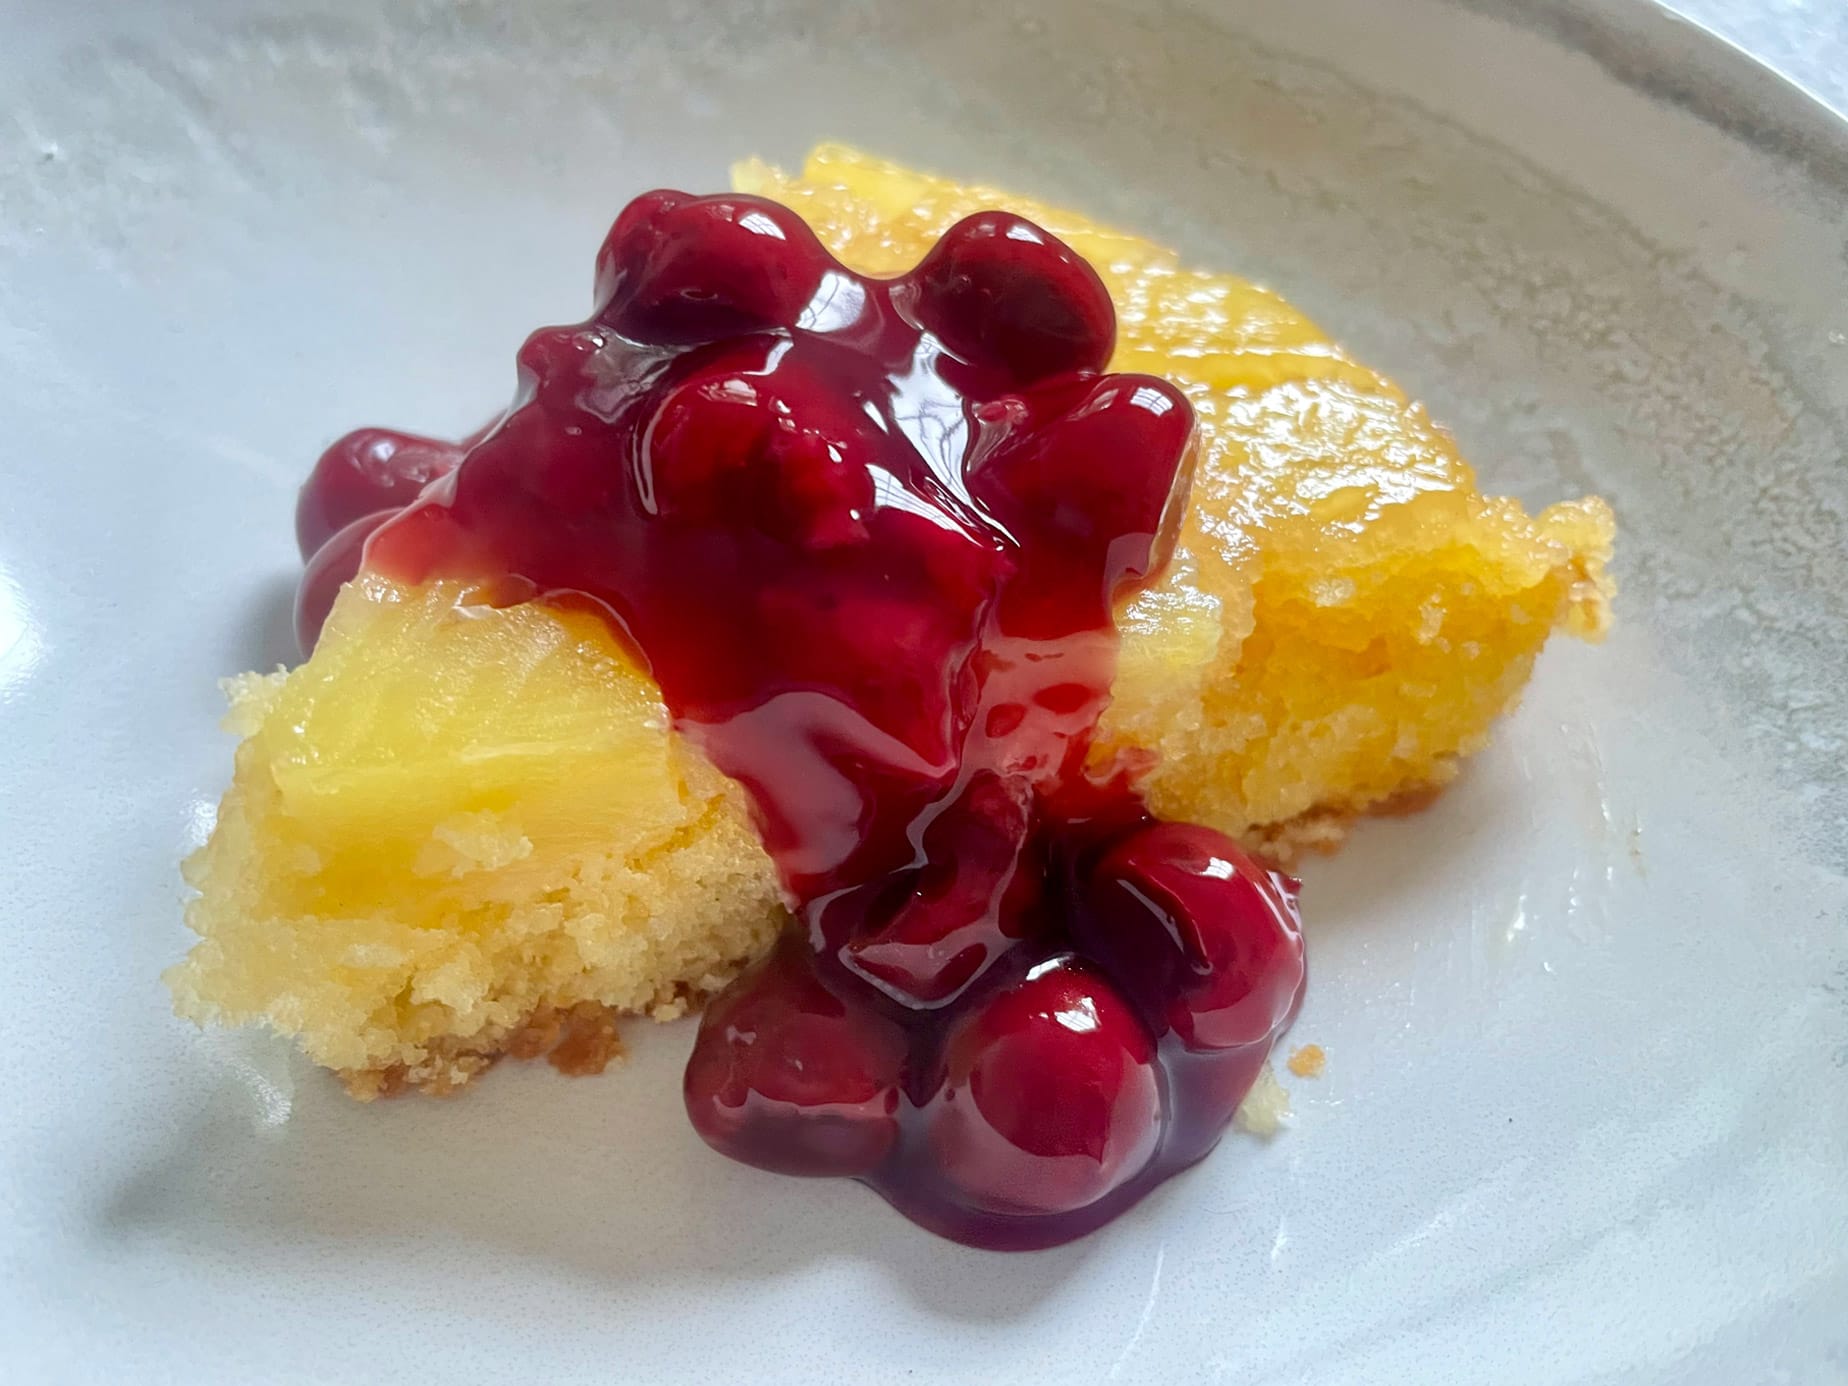 Pineapple Upside Down Cake with Cherry Sauce